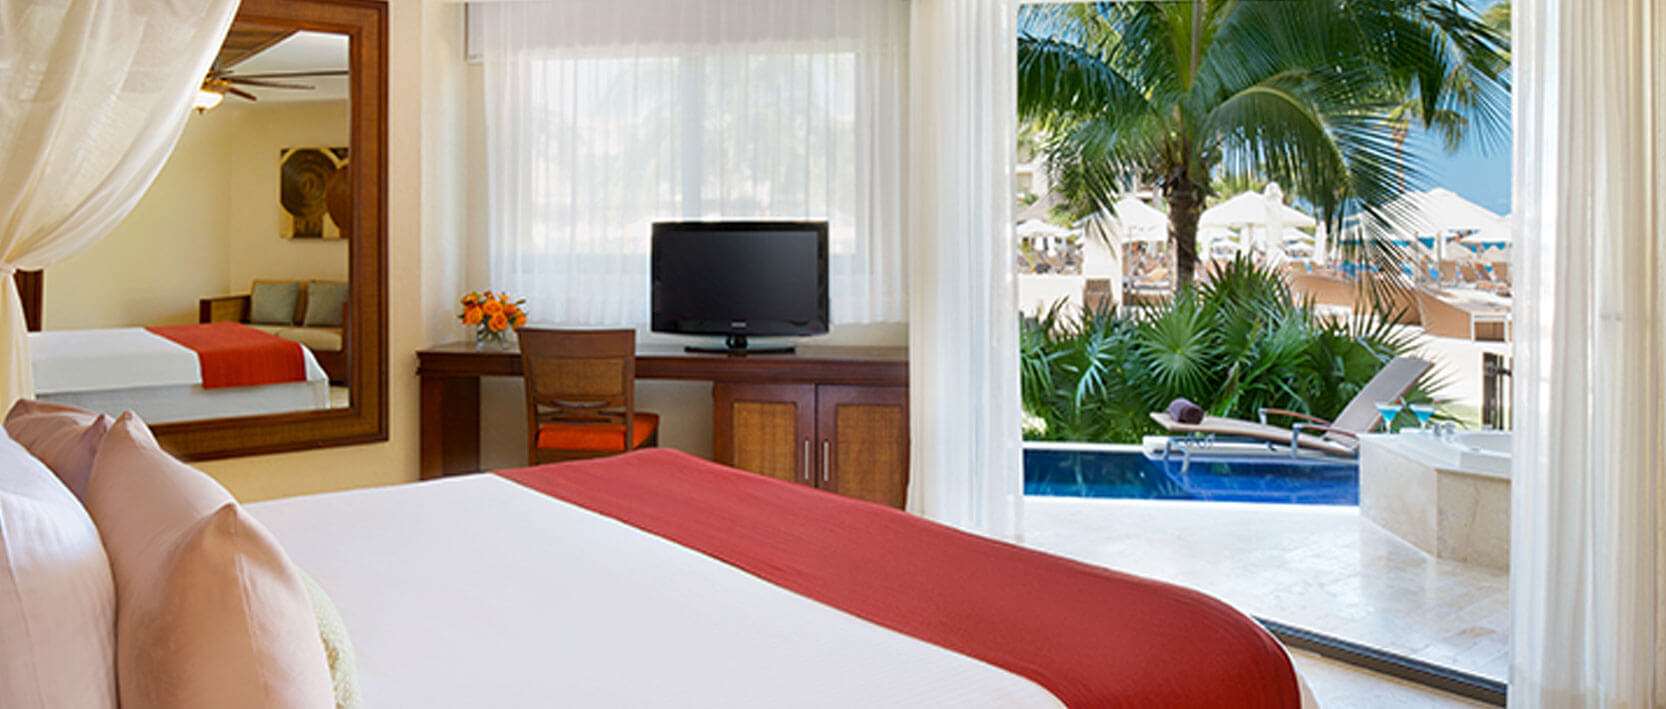 Dreams Riviera Cancun Resort Accommodations - Preferred Club with Plunge Pool